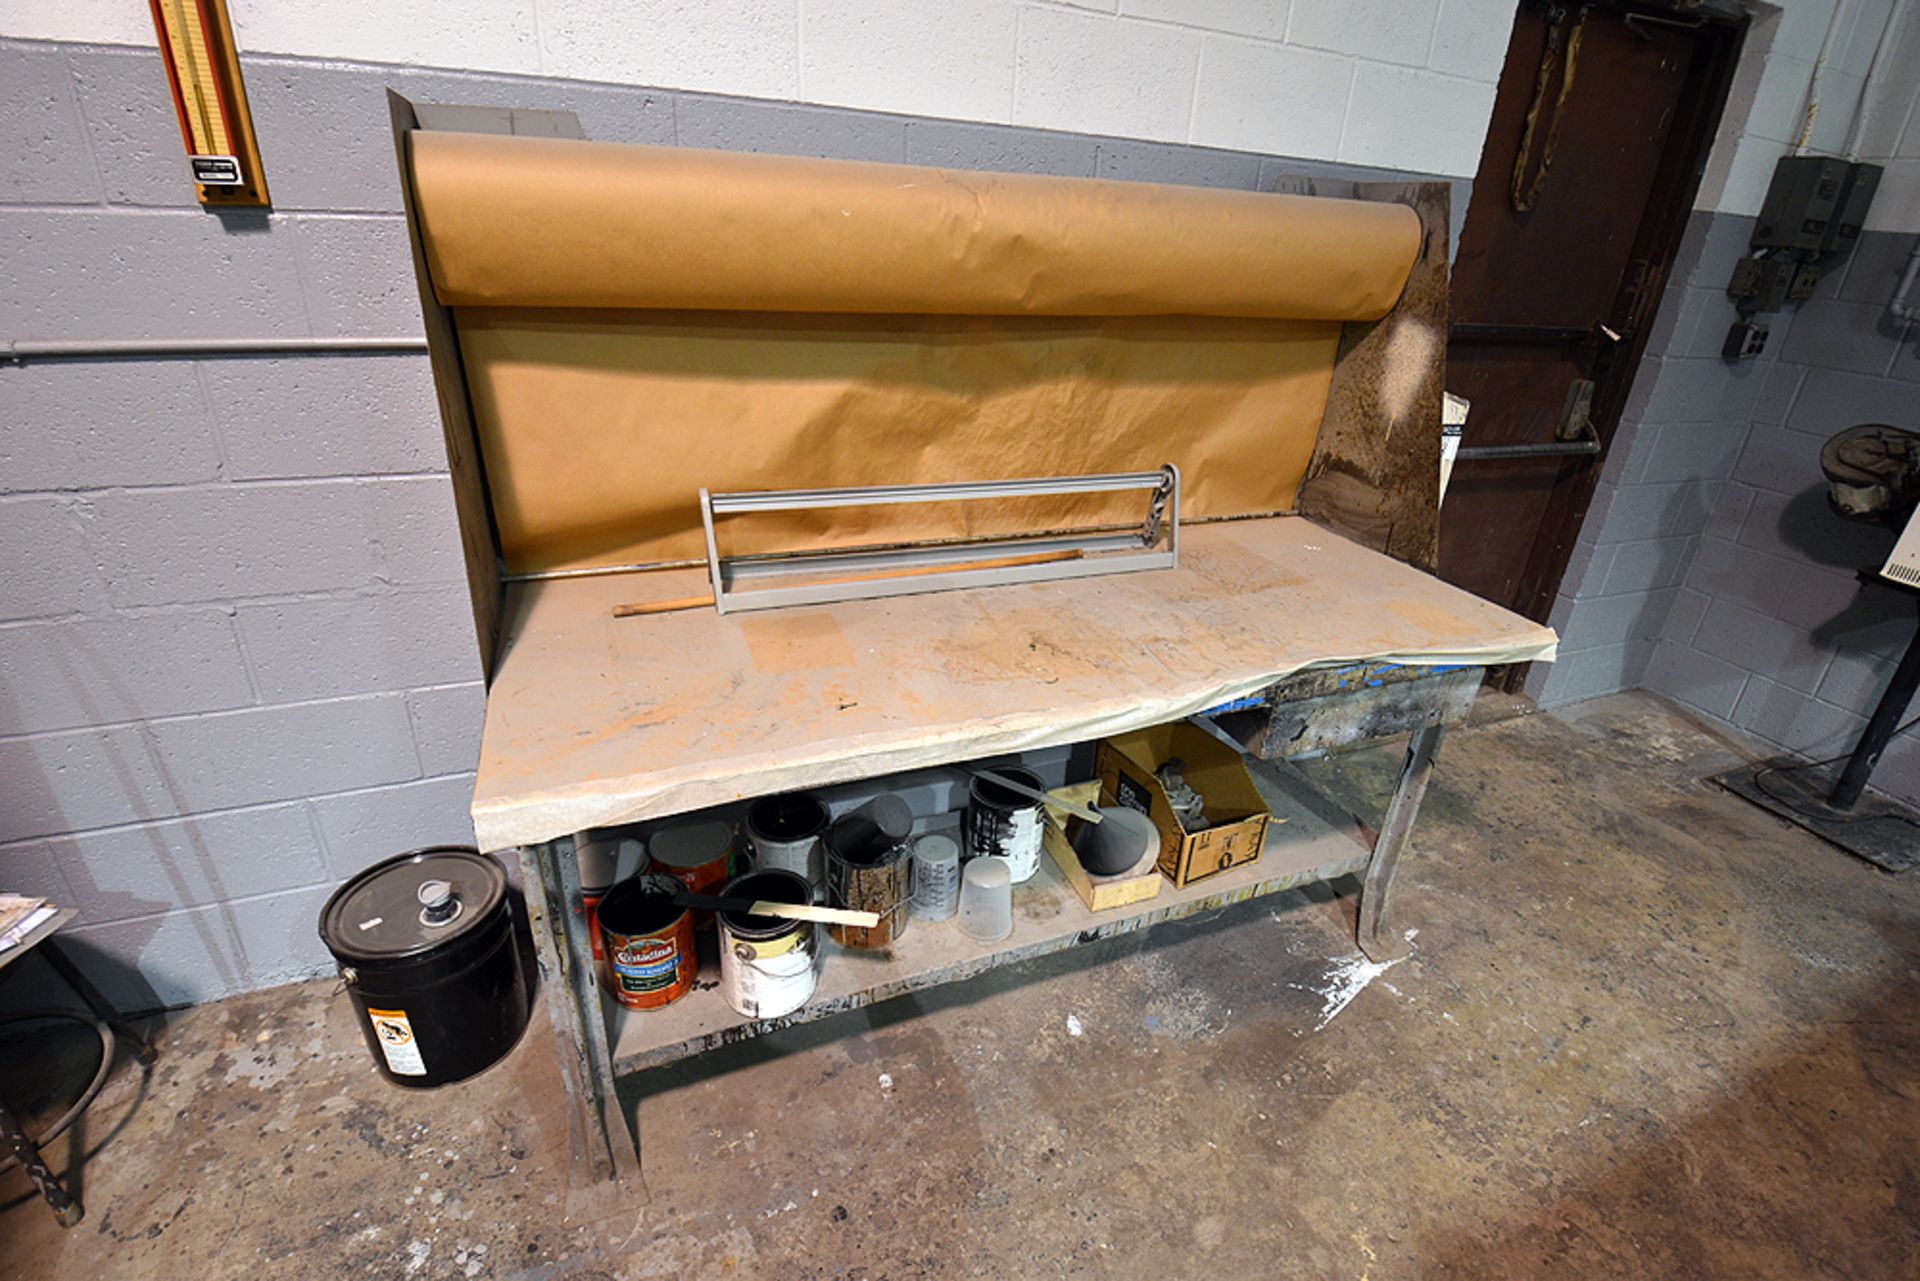 Forman's Desk & Work Benches - Image 3 of 3